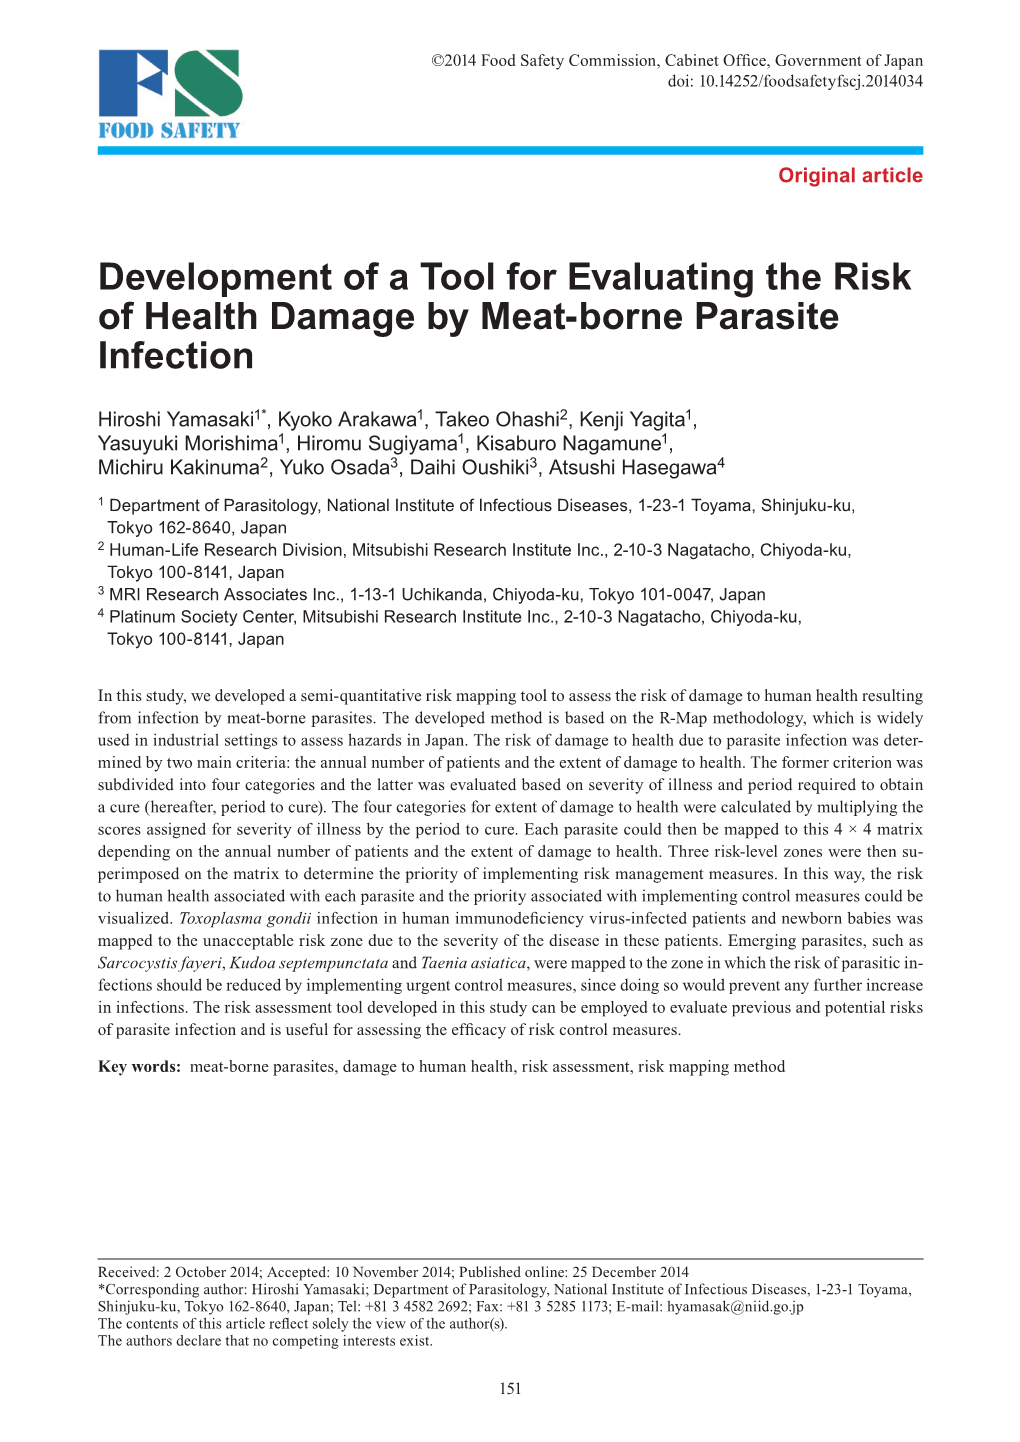 Development of a Tool for Evaluating the Risk of Health Damage by Meat-Borne Parasite Infection